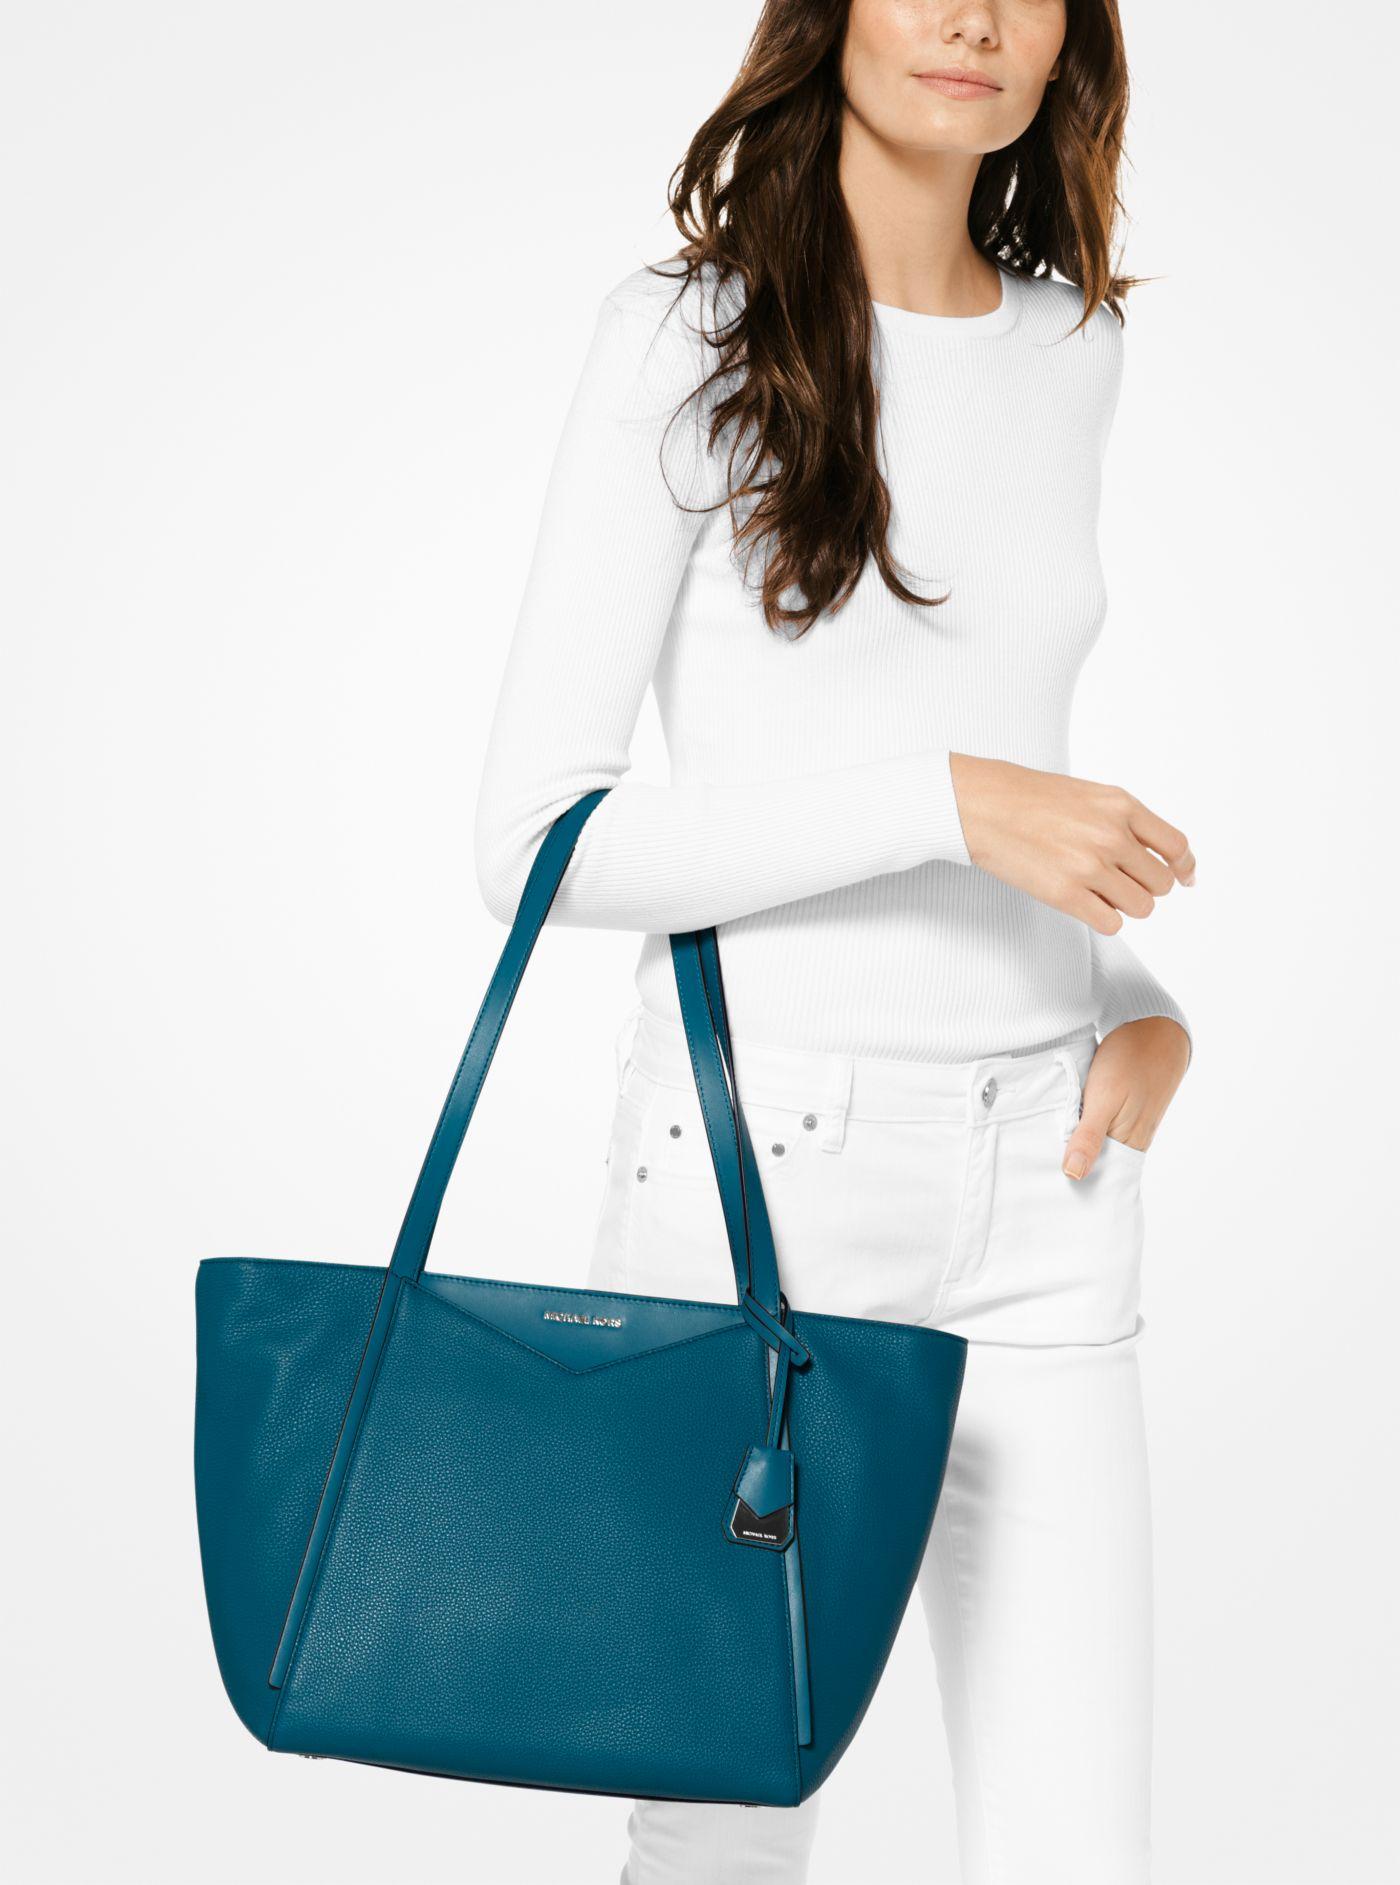 Michael Kors Whitney Large Leather Tote Bag in Teal (Blue) - Lyst